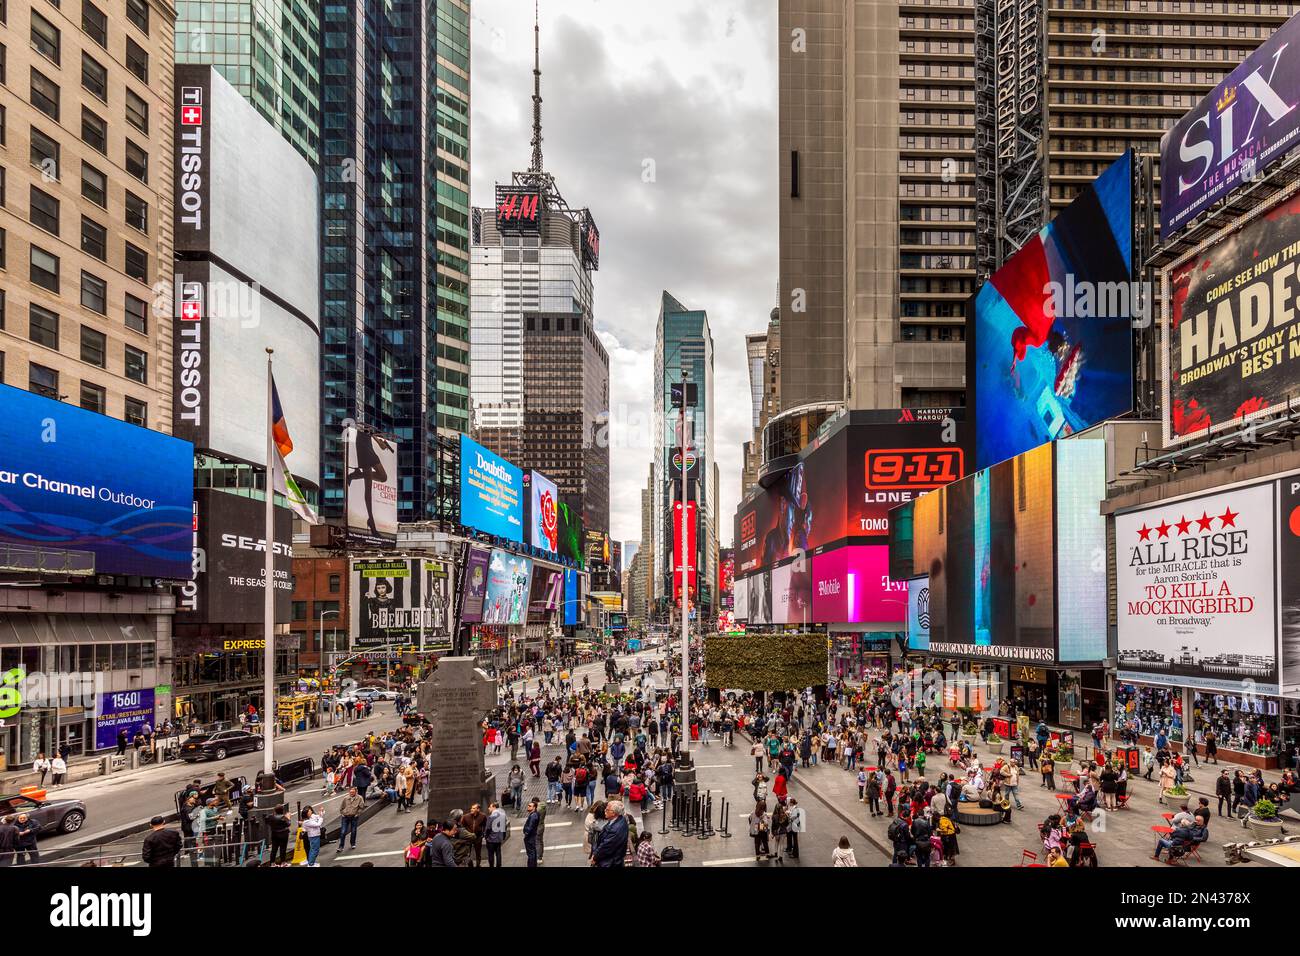 New York, USA - April 24, 2022: Times Square with tourists. Iconified as 'The Crossroads of the World' it's the brightly illuminated hub of the Broadw Stock Photo